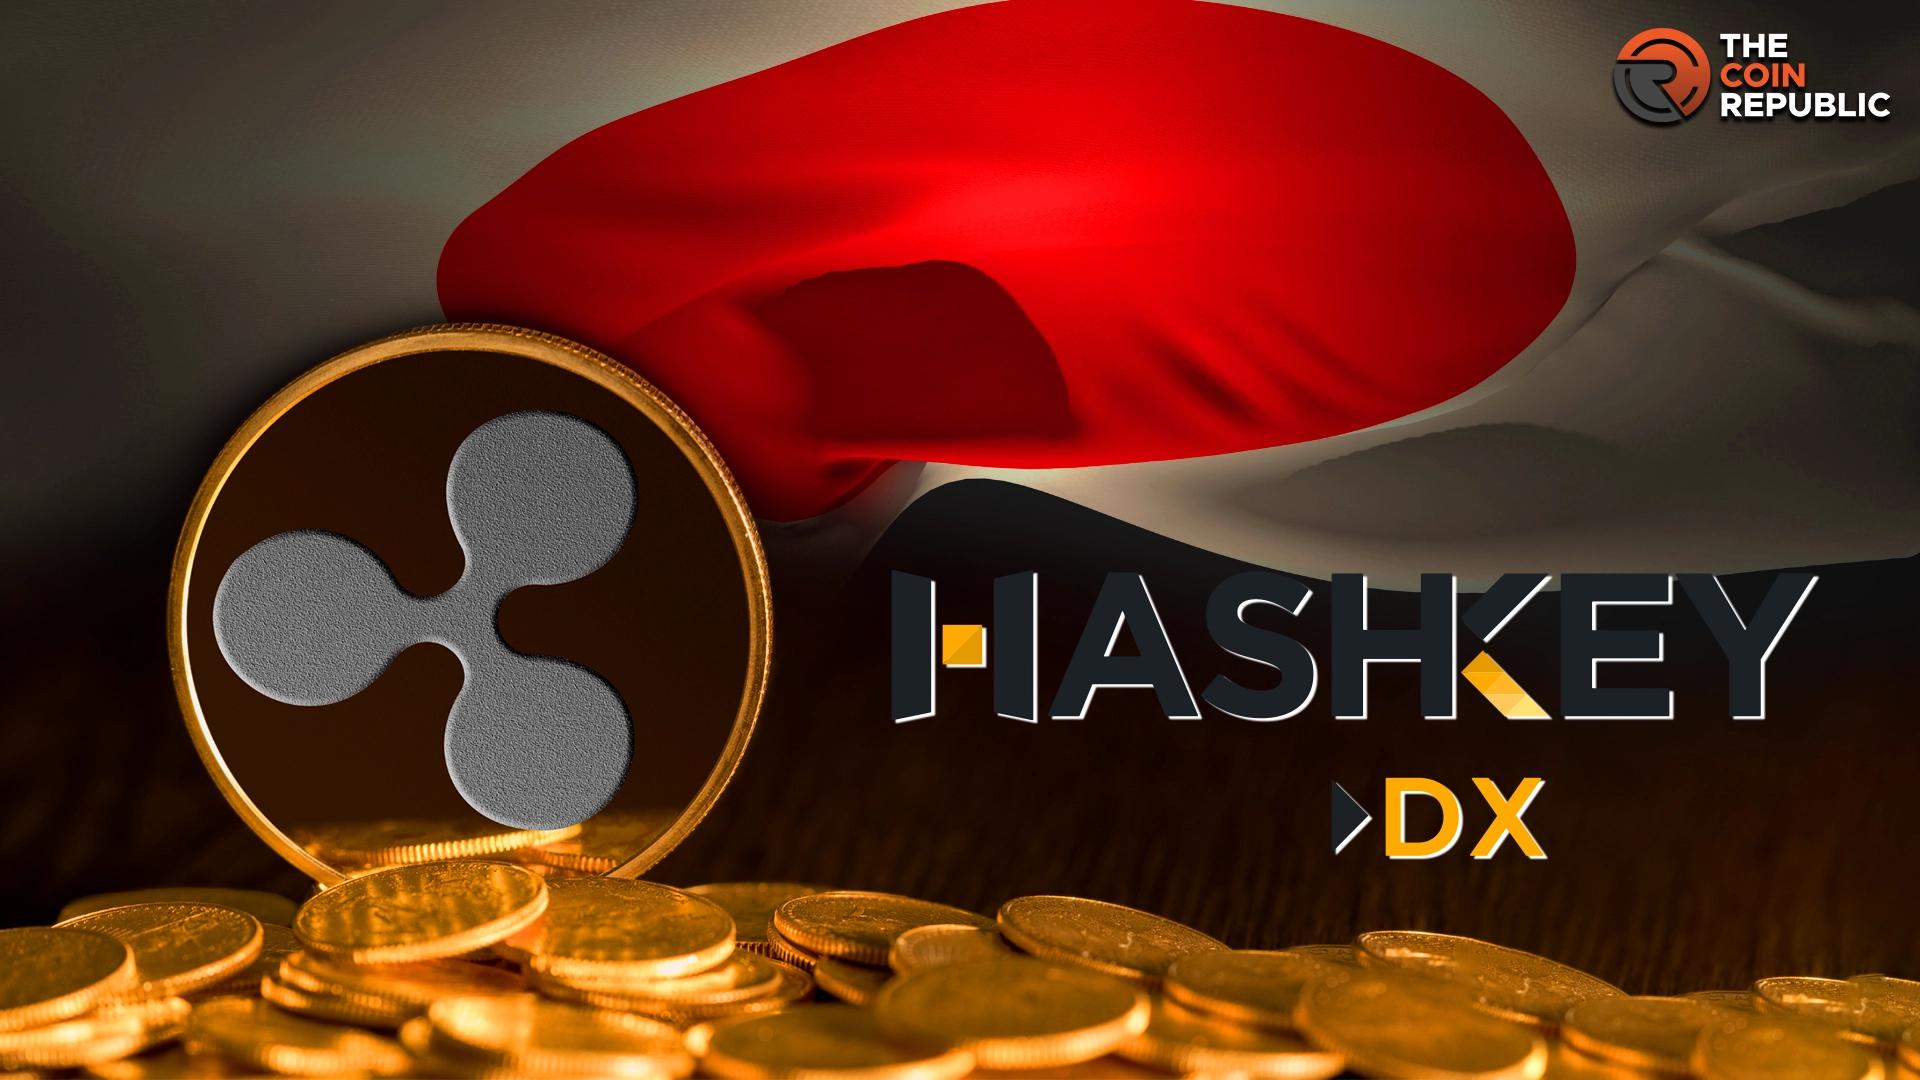 Partnership Between Ripple And HashKey DX: Boom For Japan [Video]